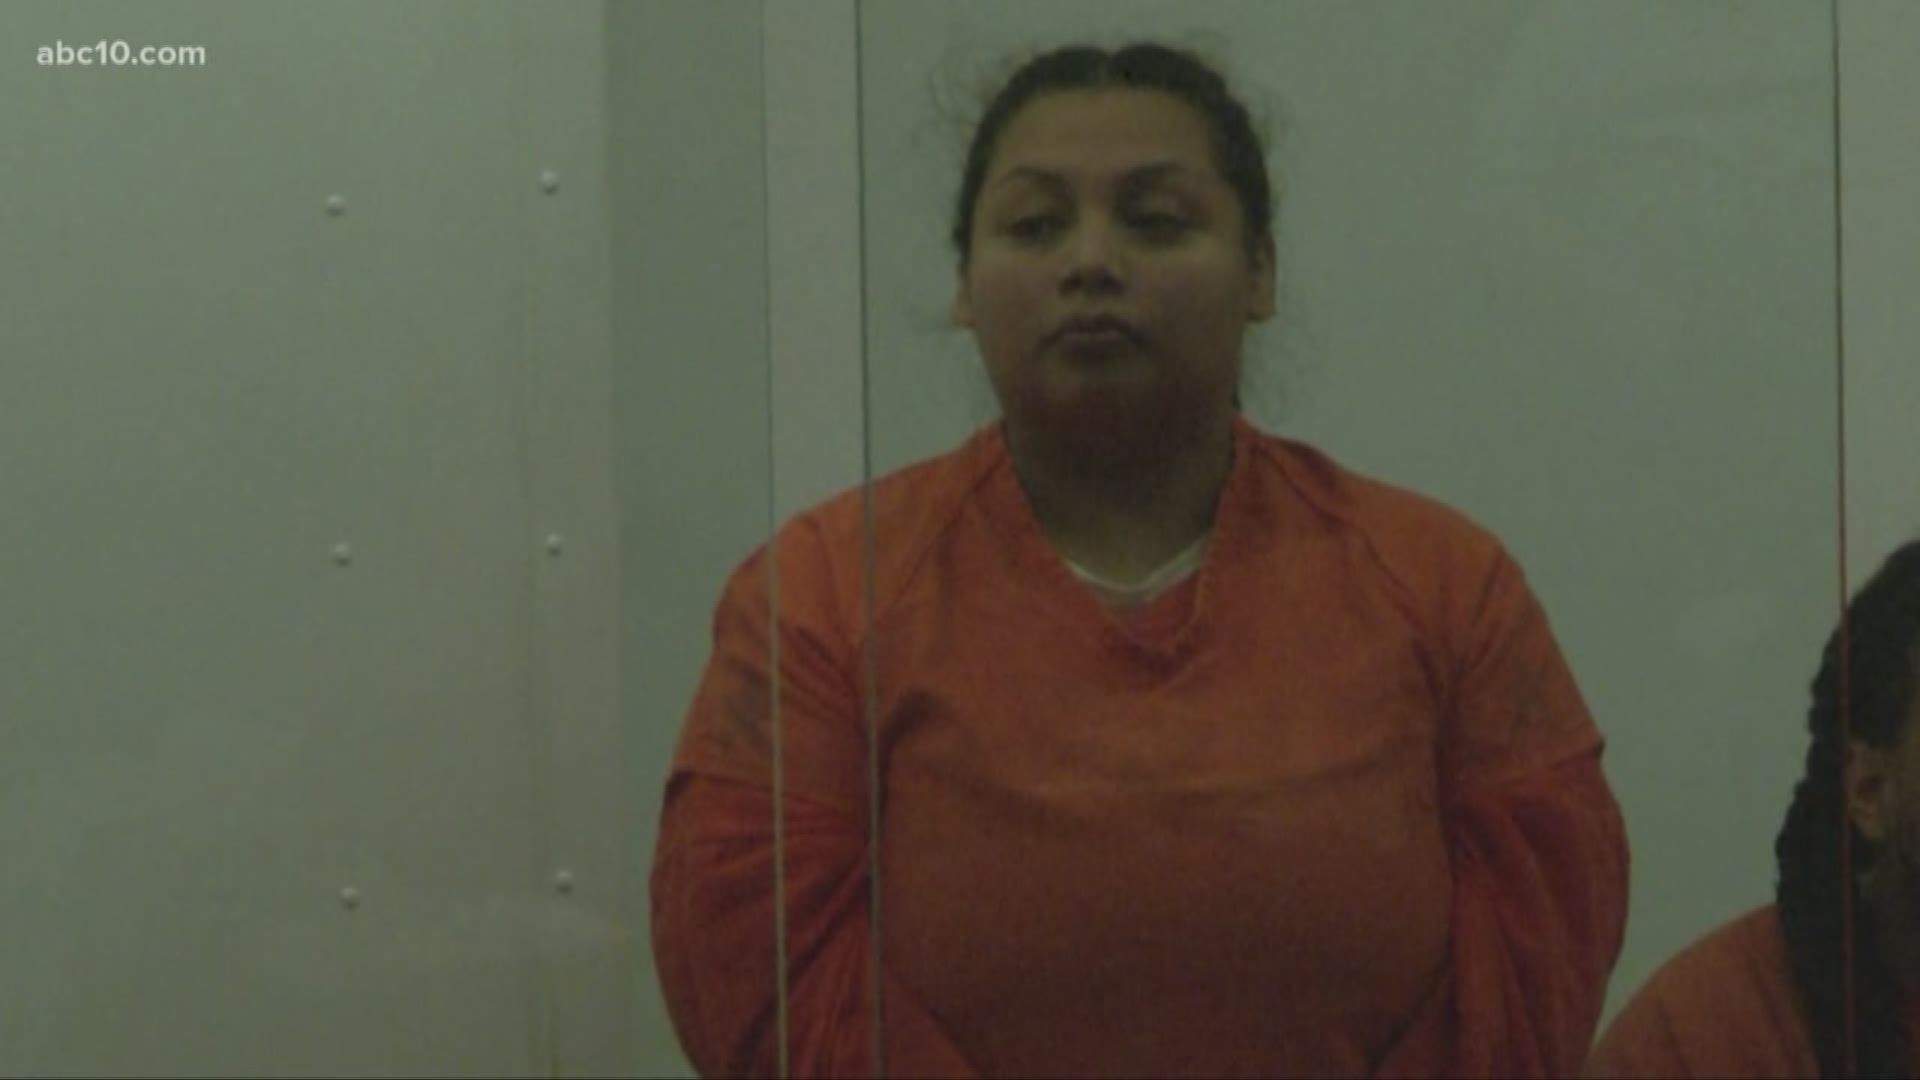 The San Joaquin DA said Zulma Chavez pleaded guilty in the death of her stepdaughter because she would have faced 25-years to life if the case went to trial.